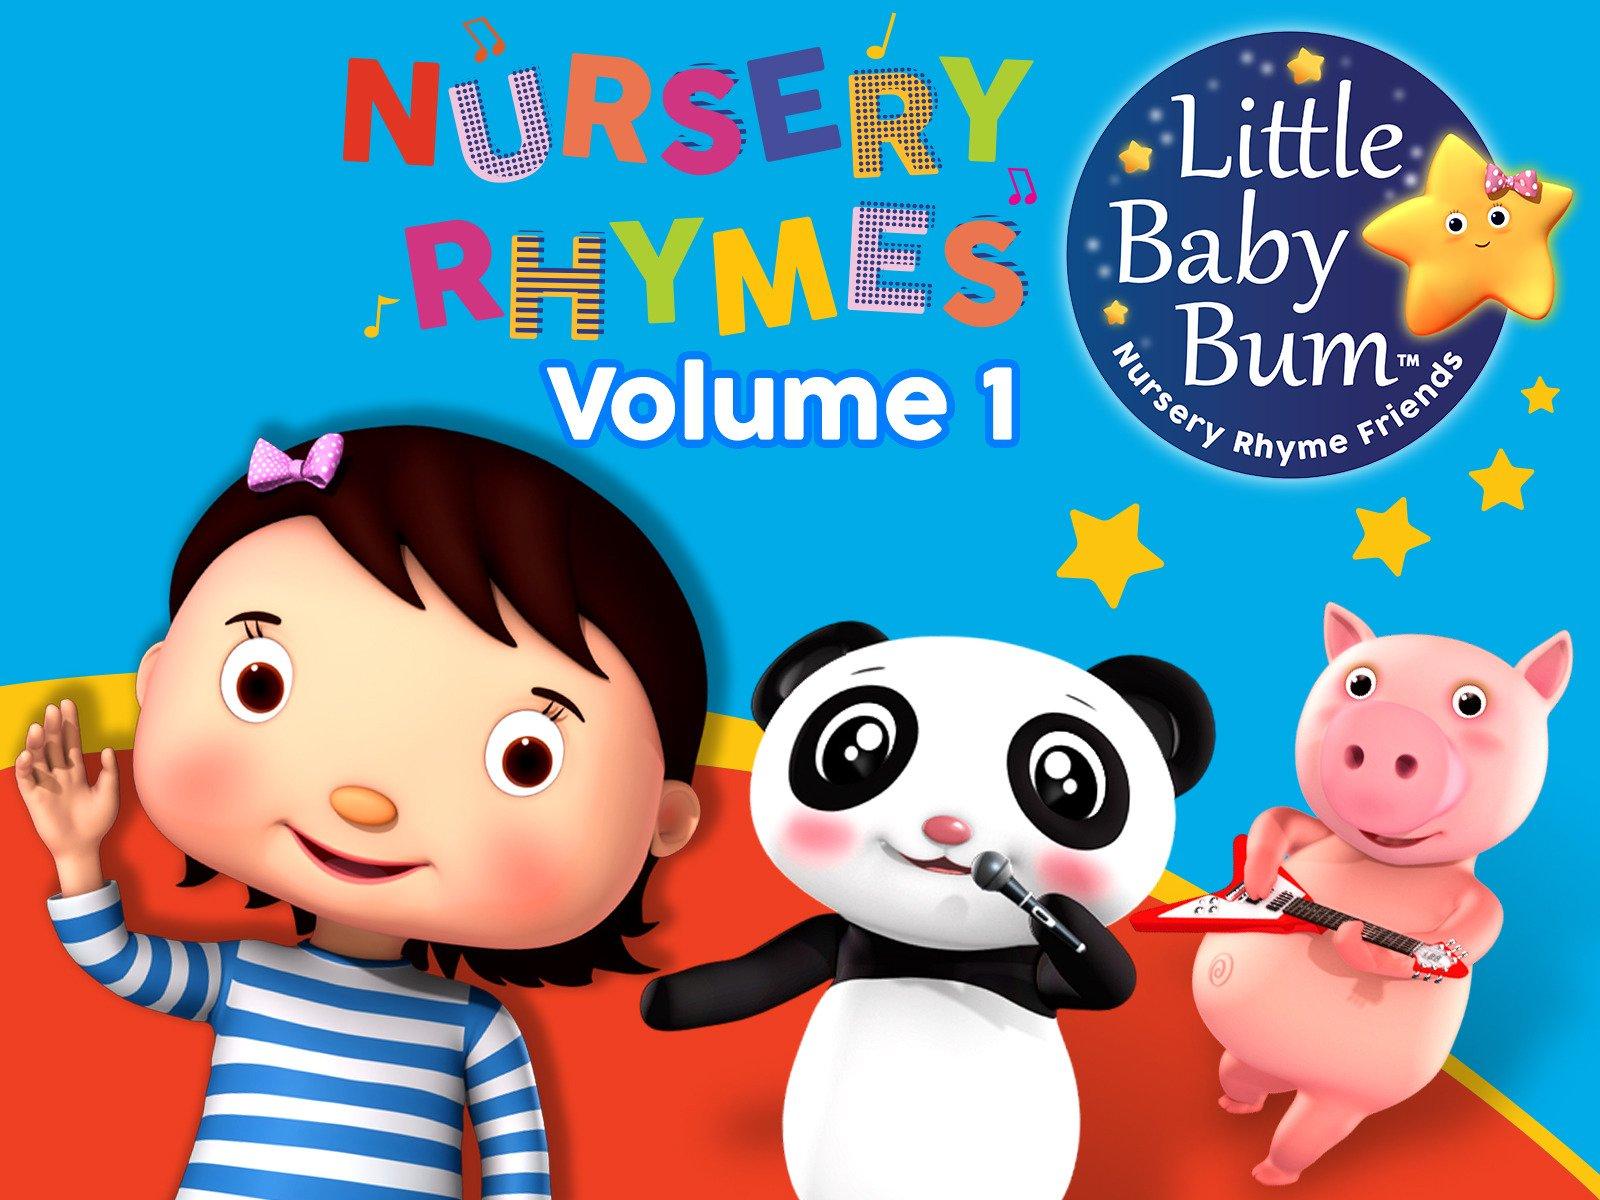 Watch Nursery Rhymes and Kids Songs by Little Baby Bum